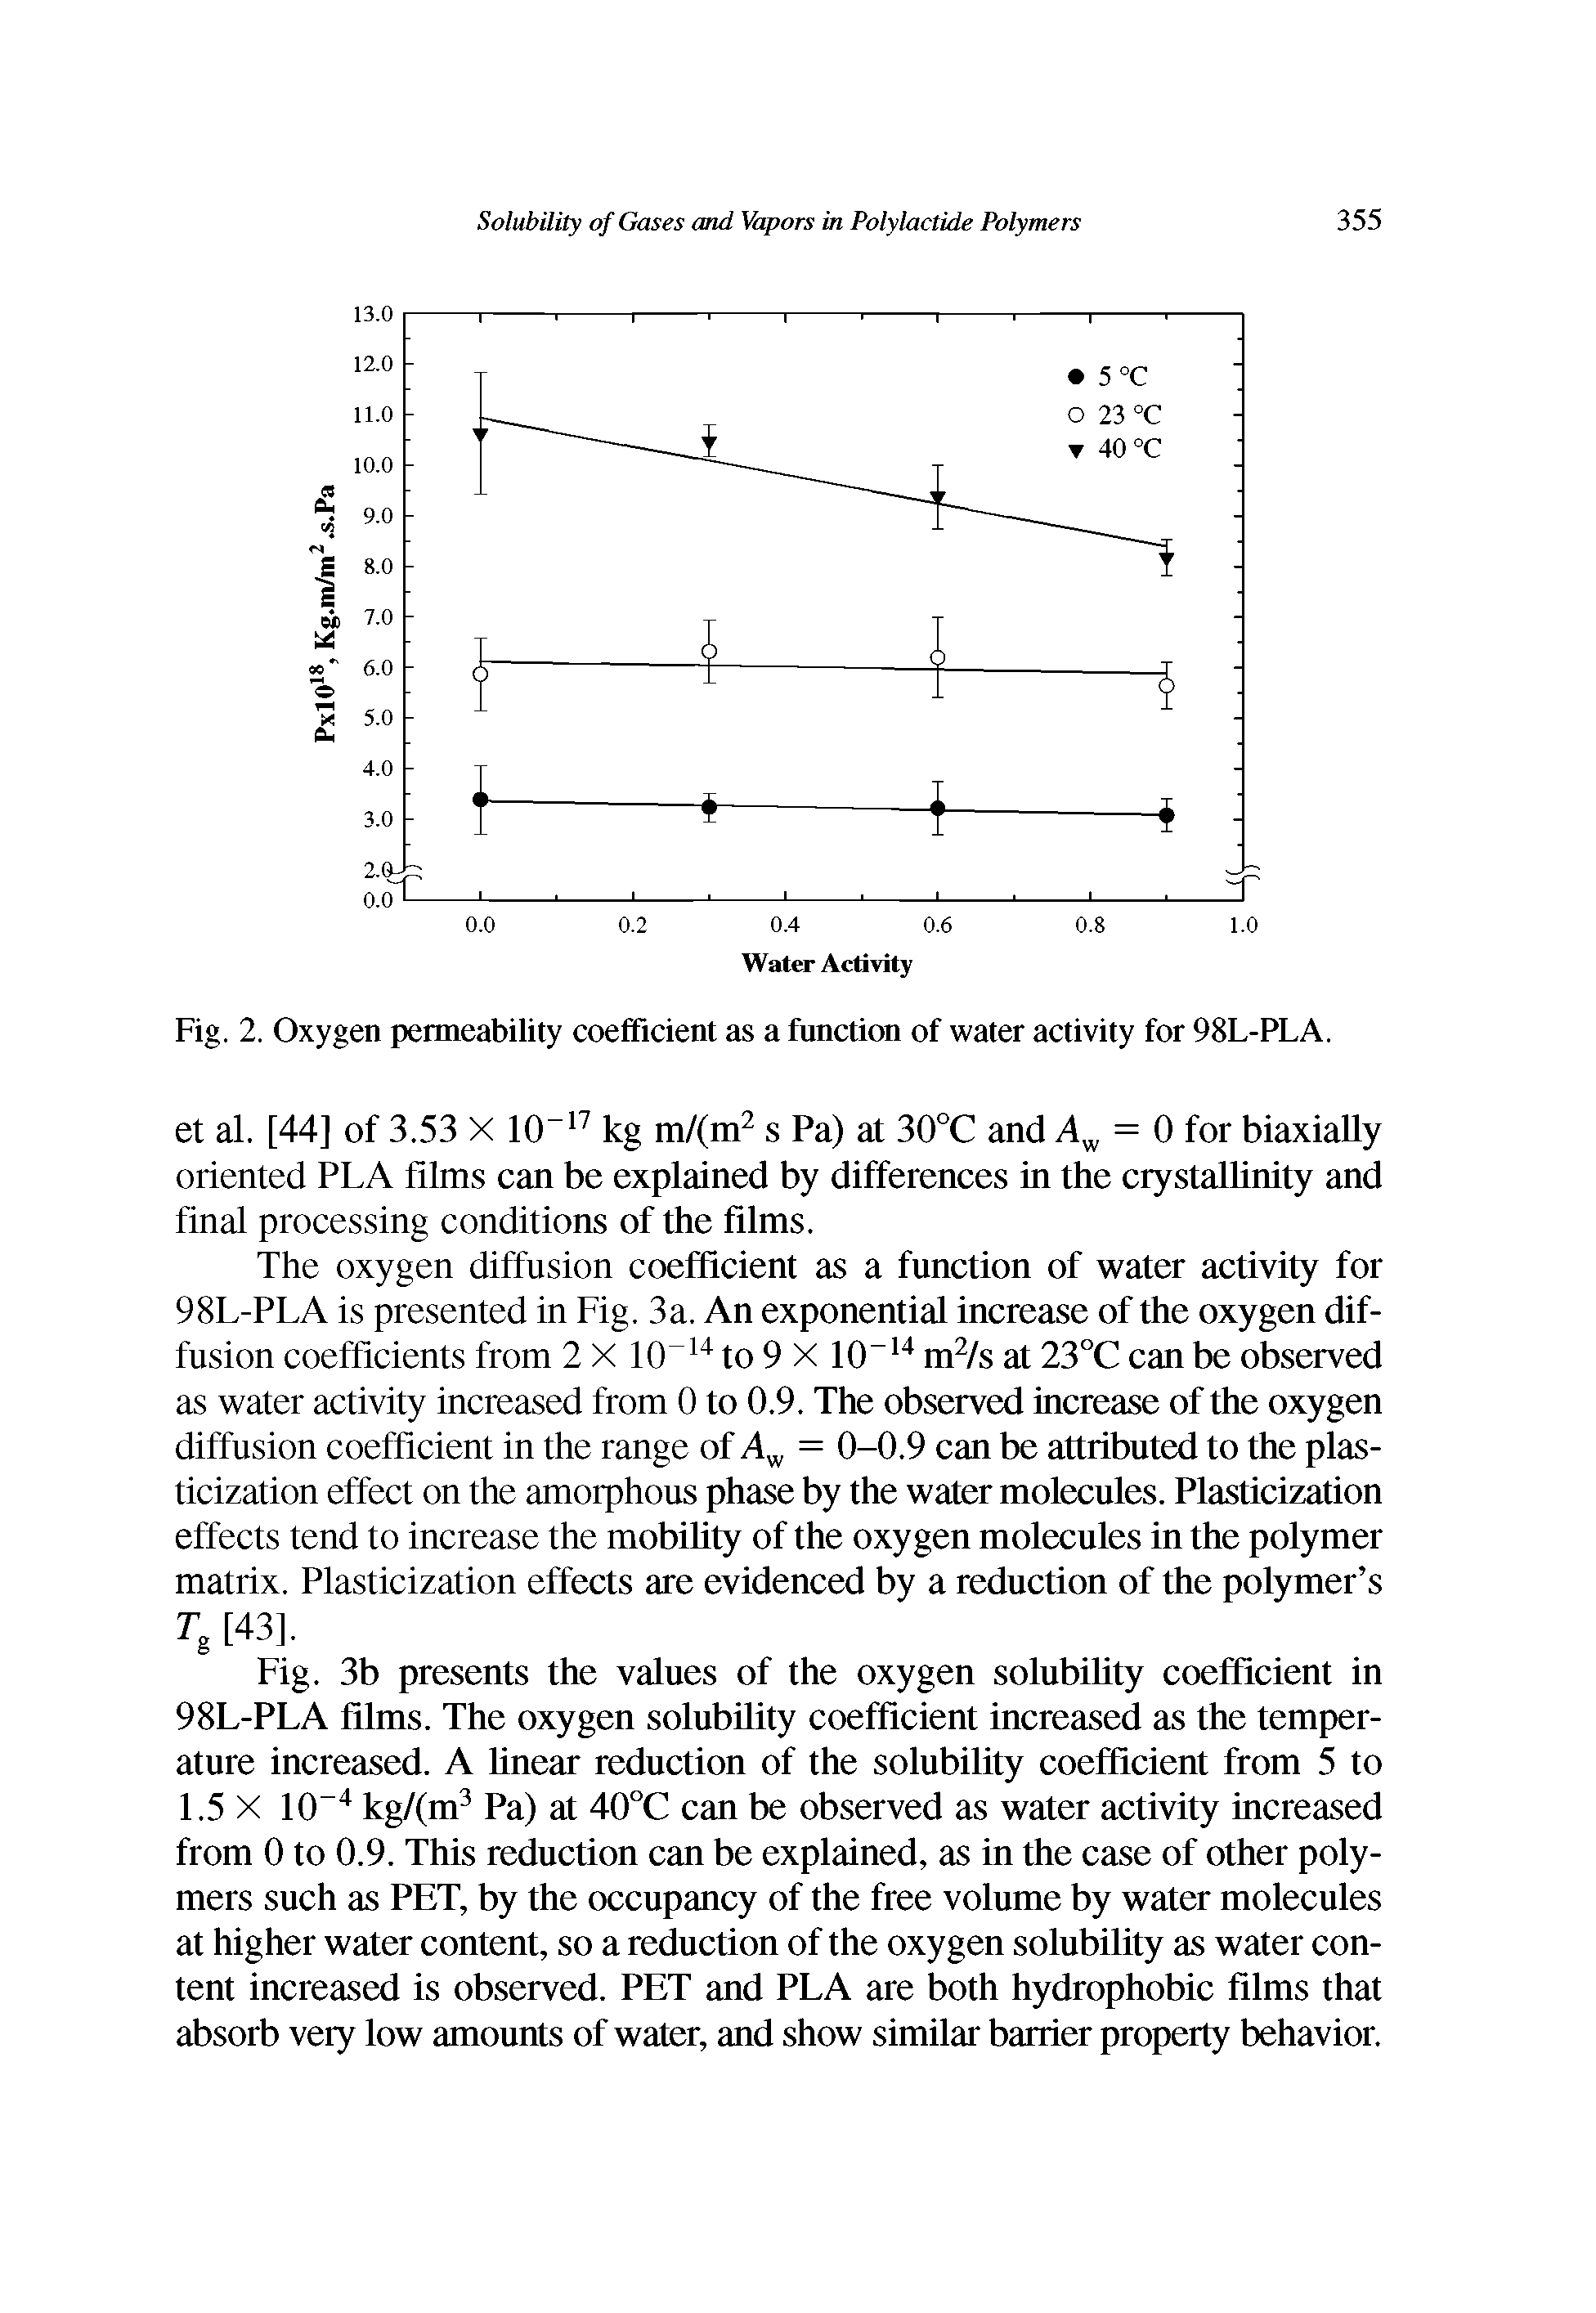 Fig. 2. Oxygen permeability coefficient as a function of water activity for 98L-PLA.